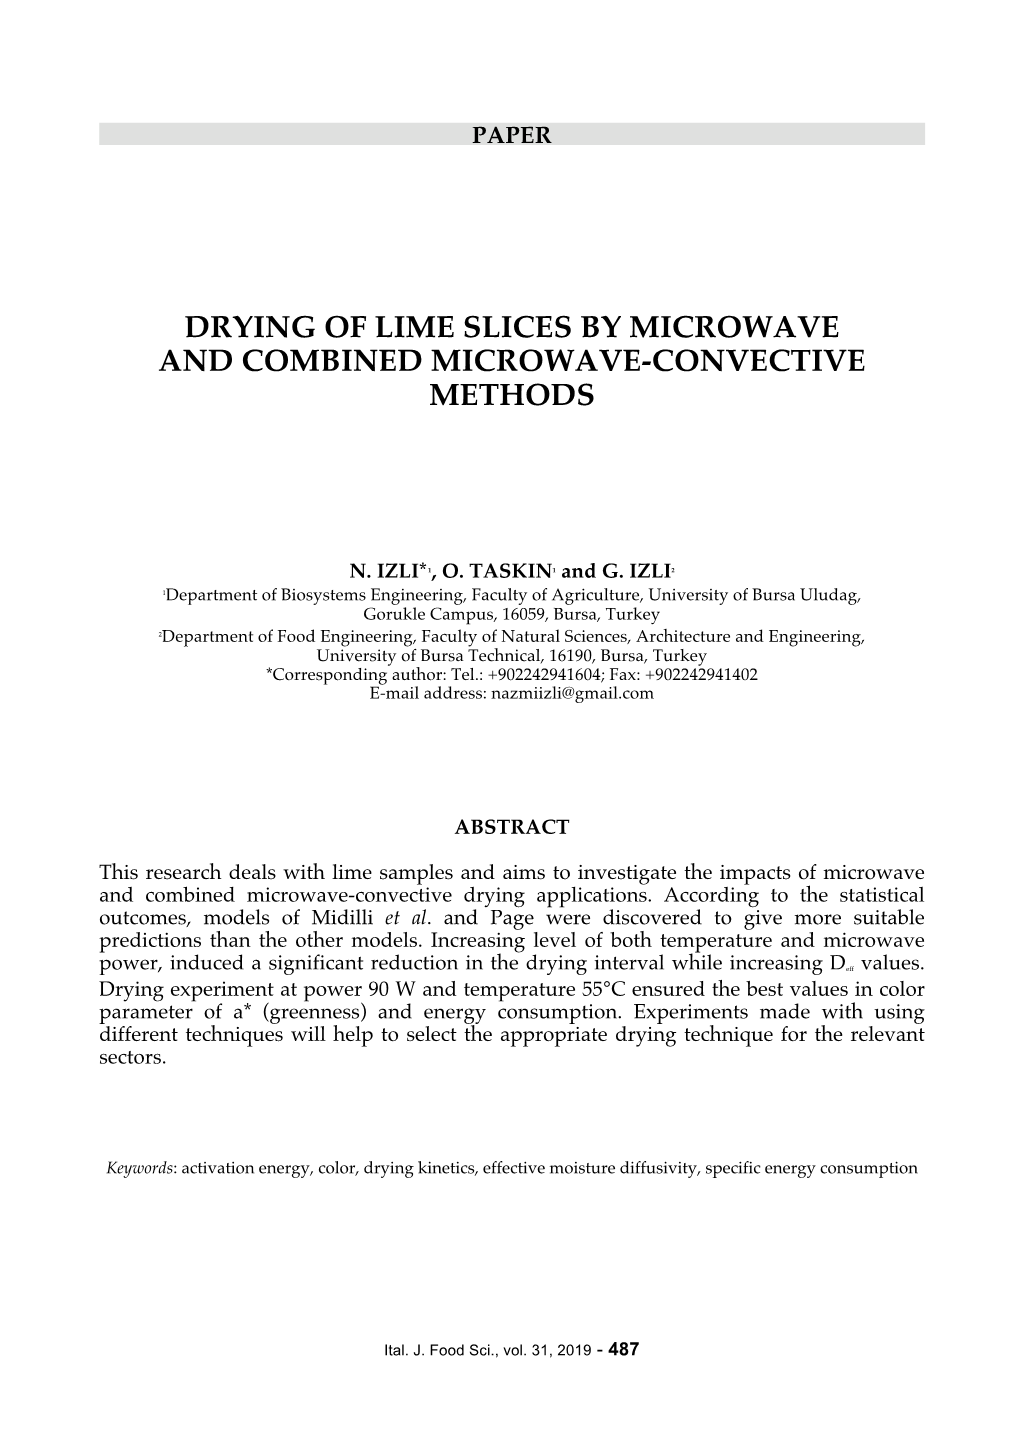 Drying of Lime Slices by Microwave and Combined Microwave-Convective Methods